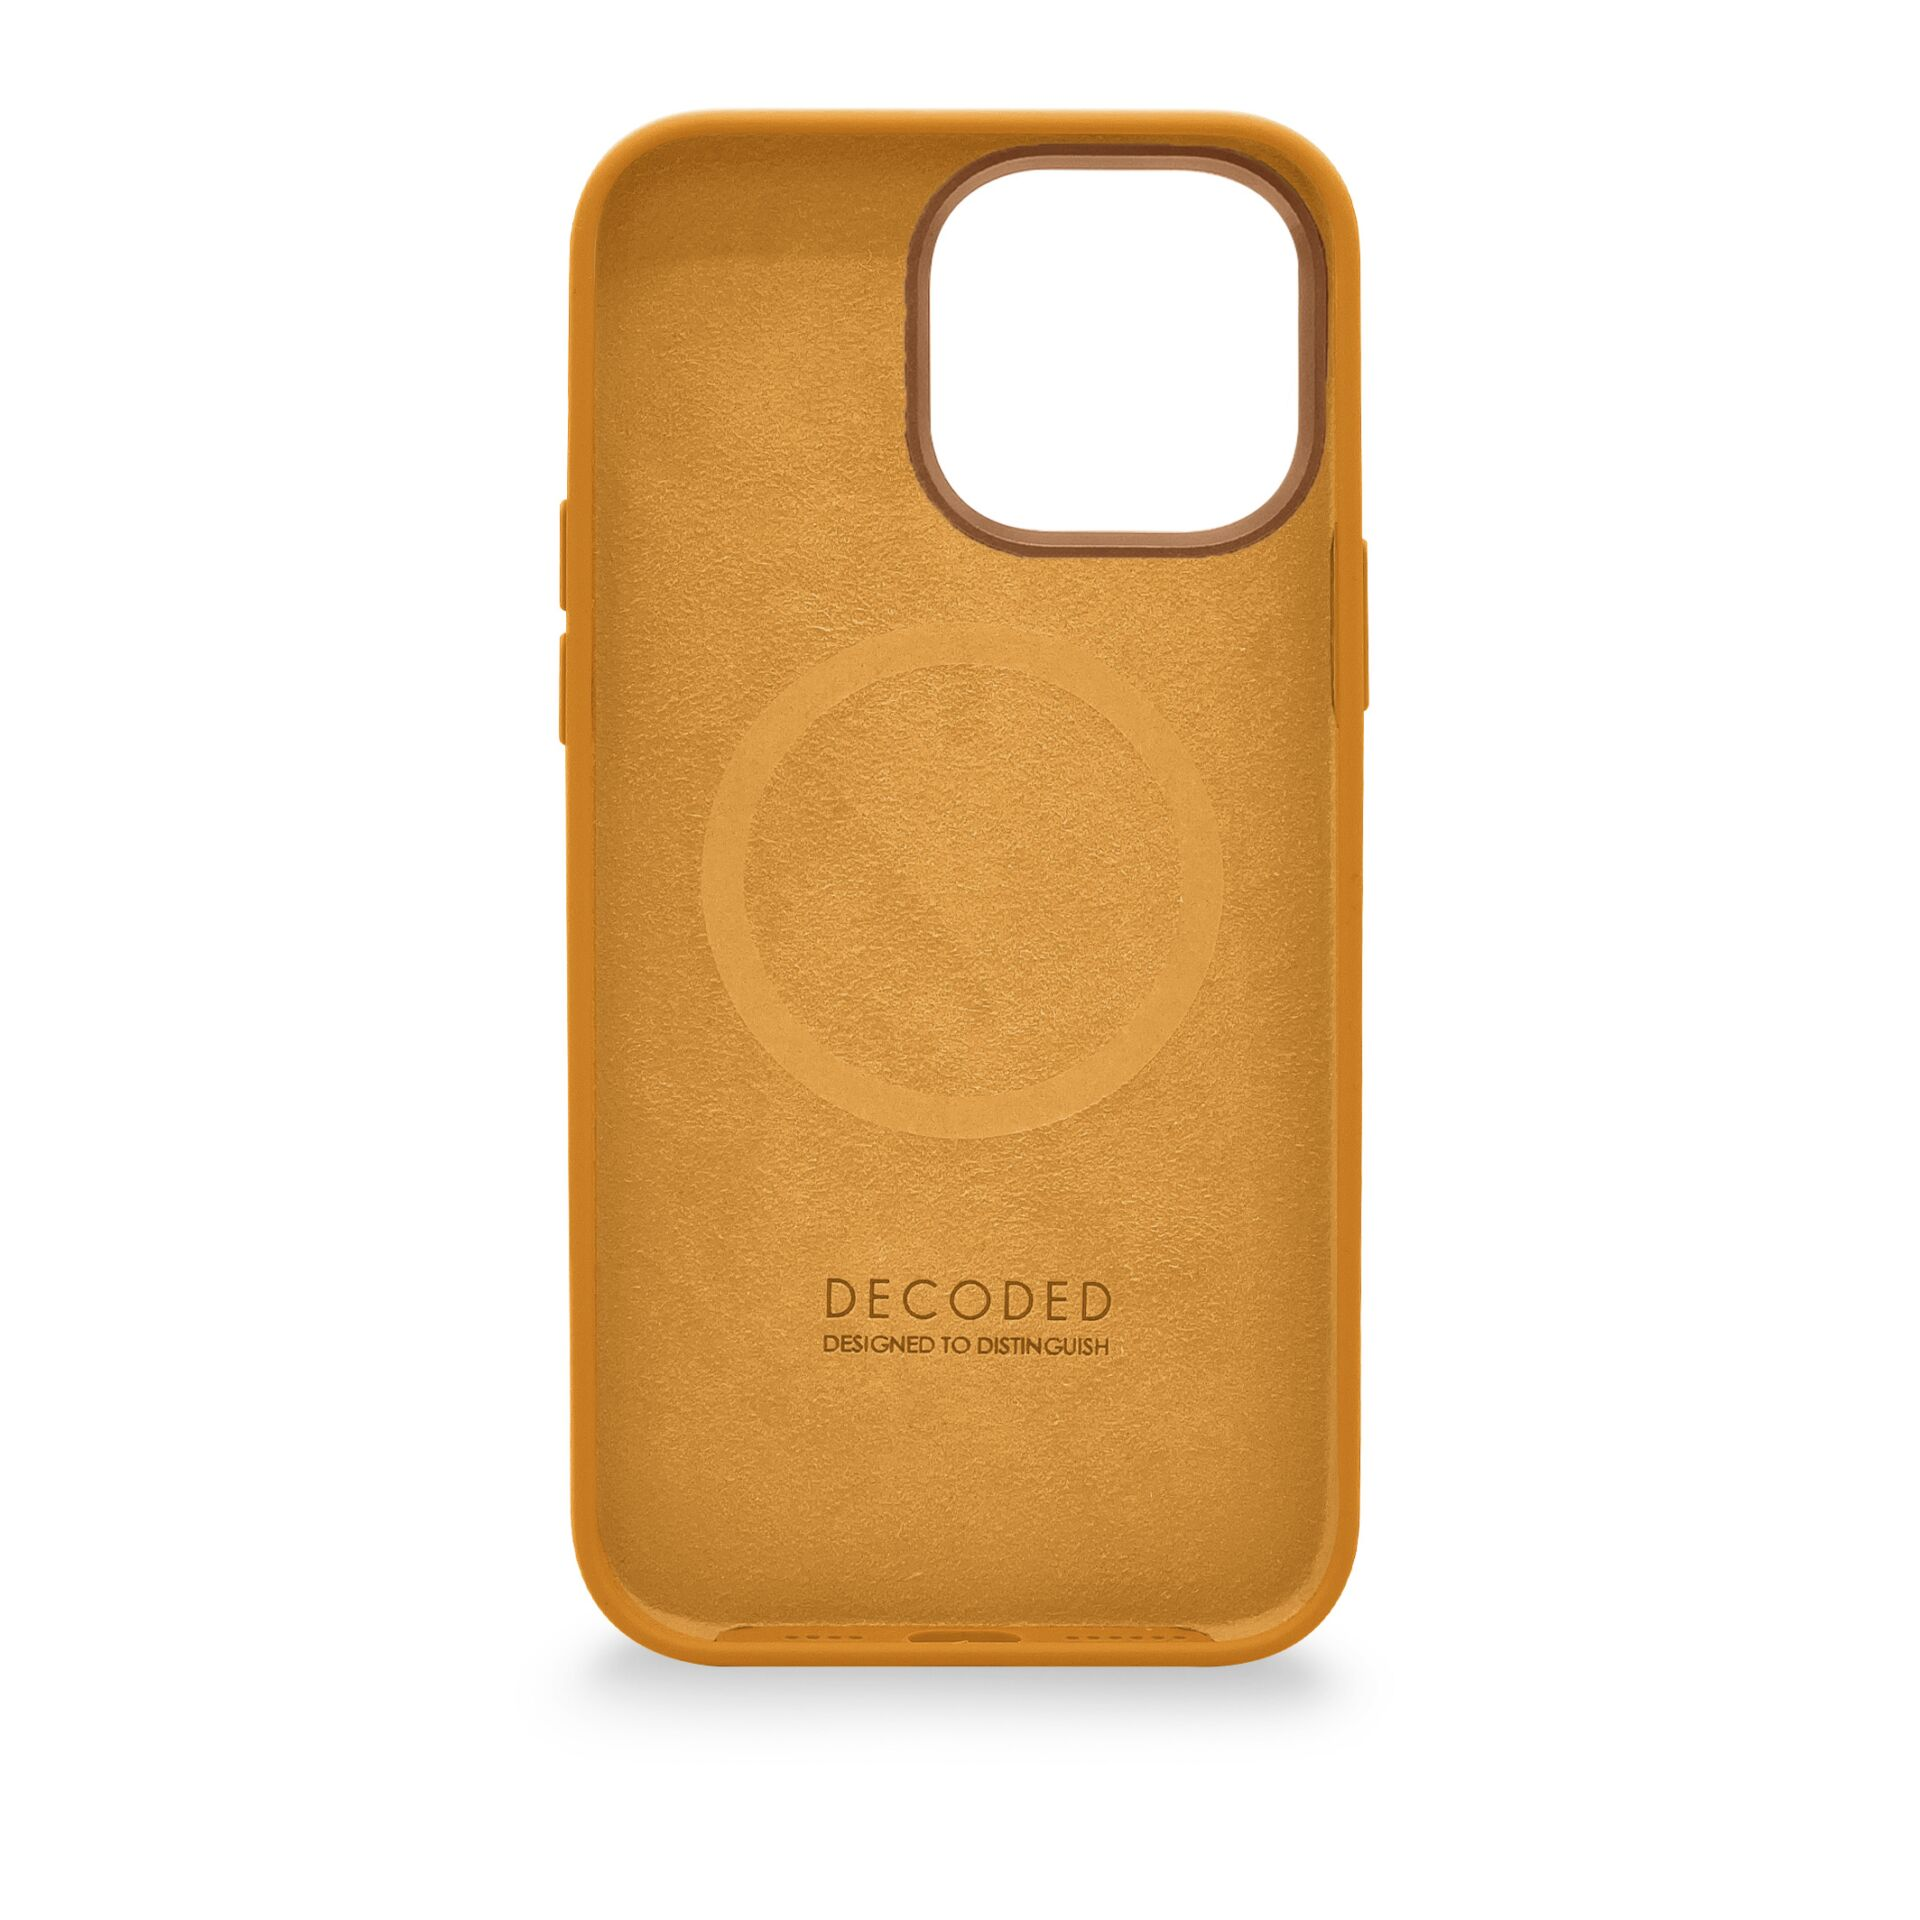 Apricot AntiMicrobial Backcover, Apricot, Pro, iPhone Apple, 14 DECODED Backcover Silicone